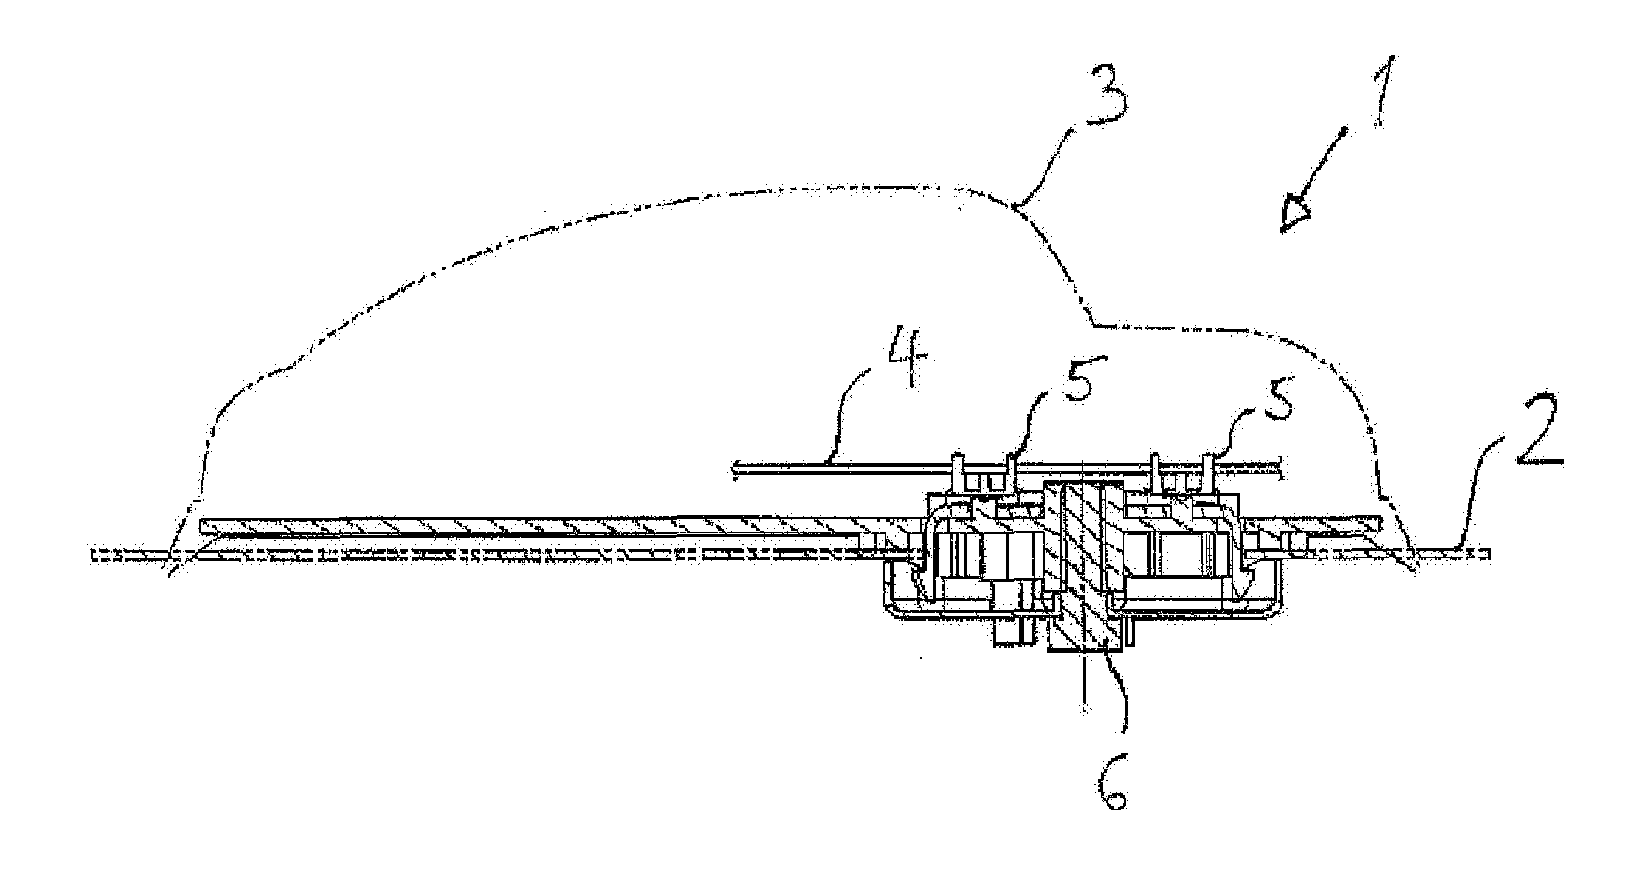 Star-handle system for locking antenna to a vehicle roof